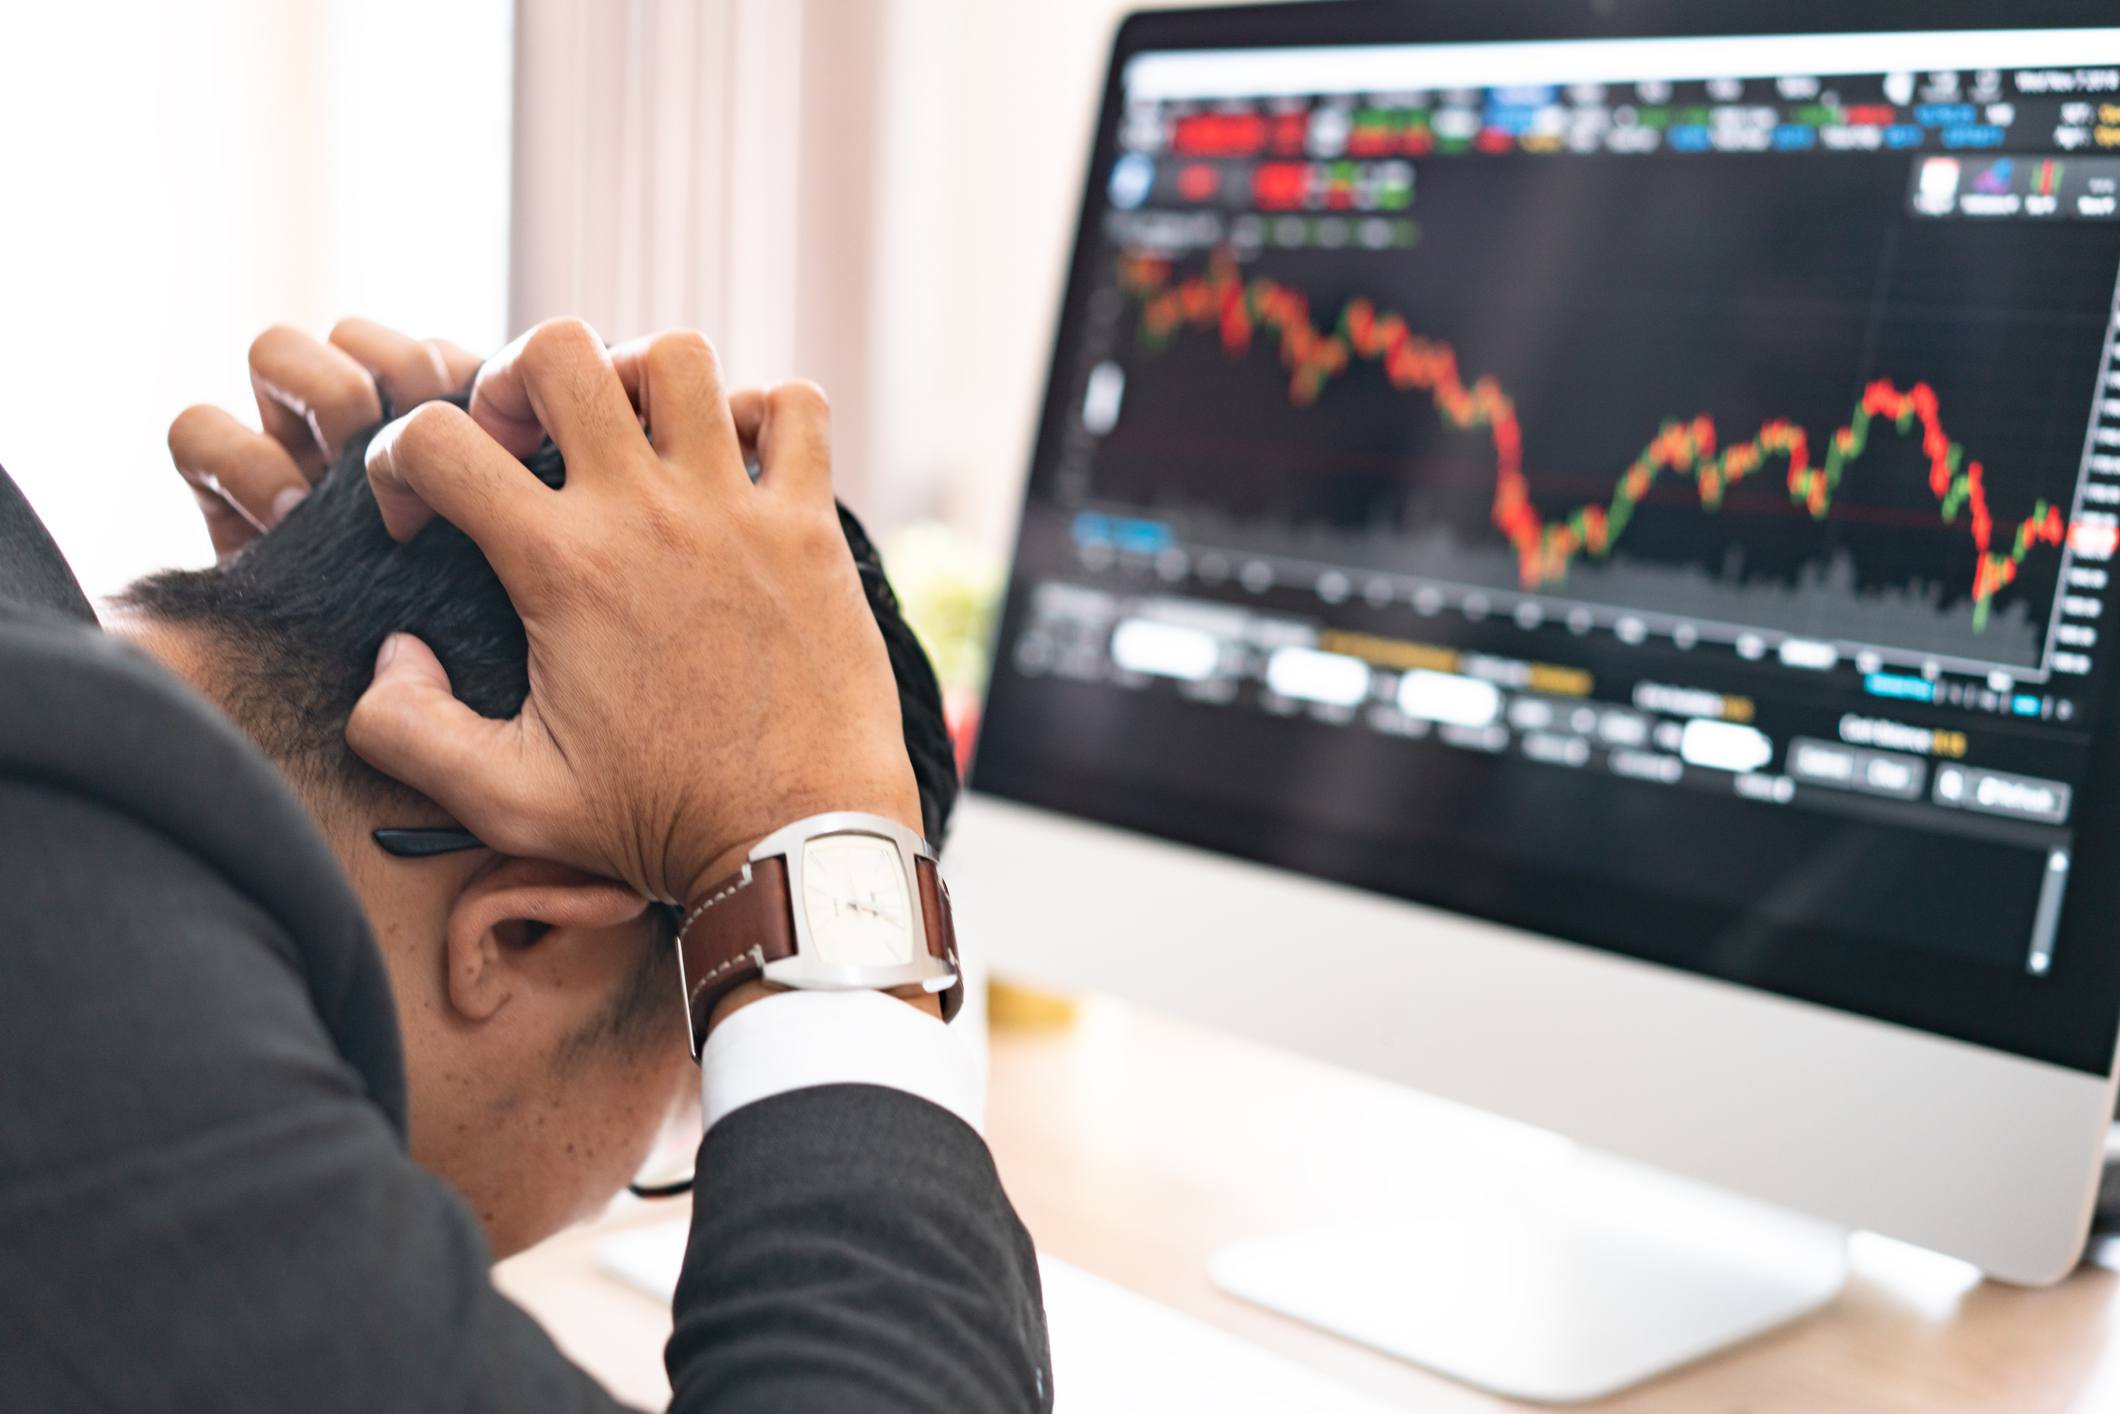 How to Manage Fear and Greed in Trading